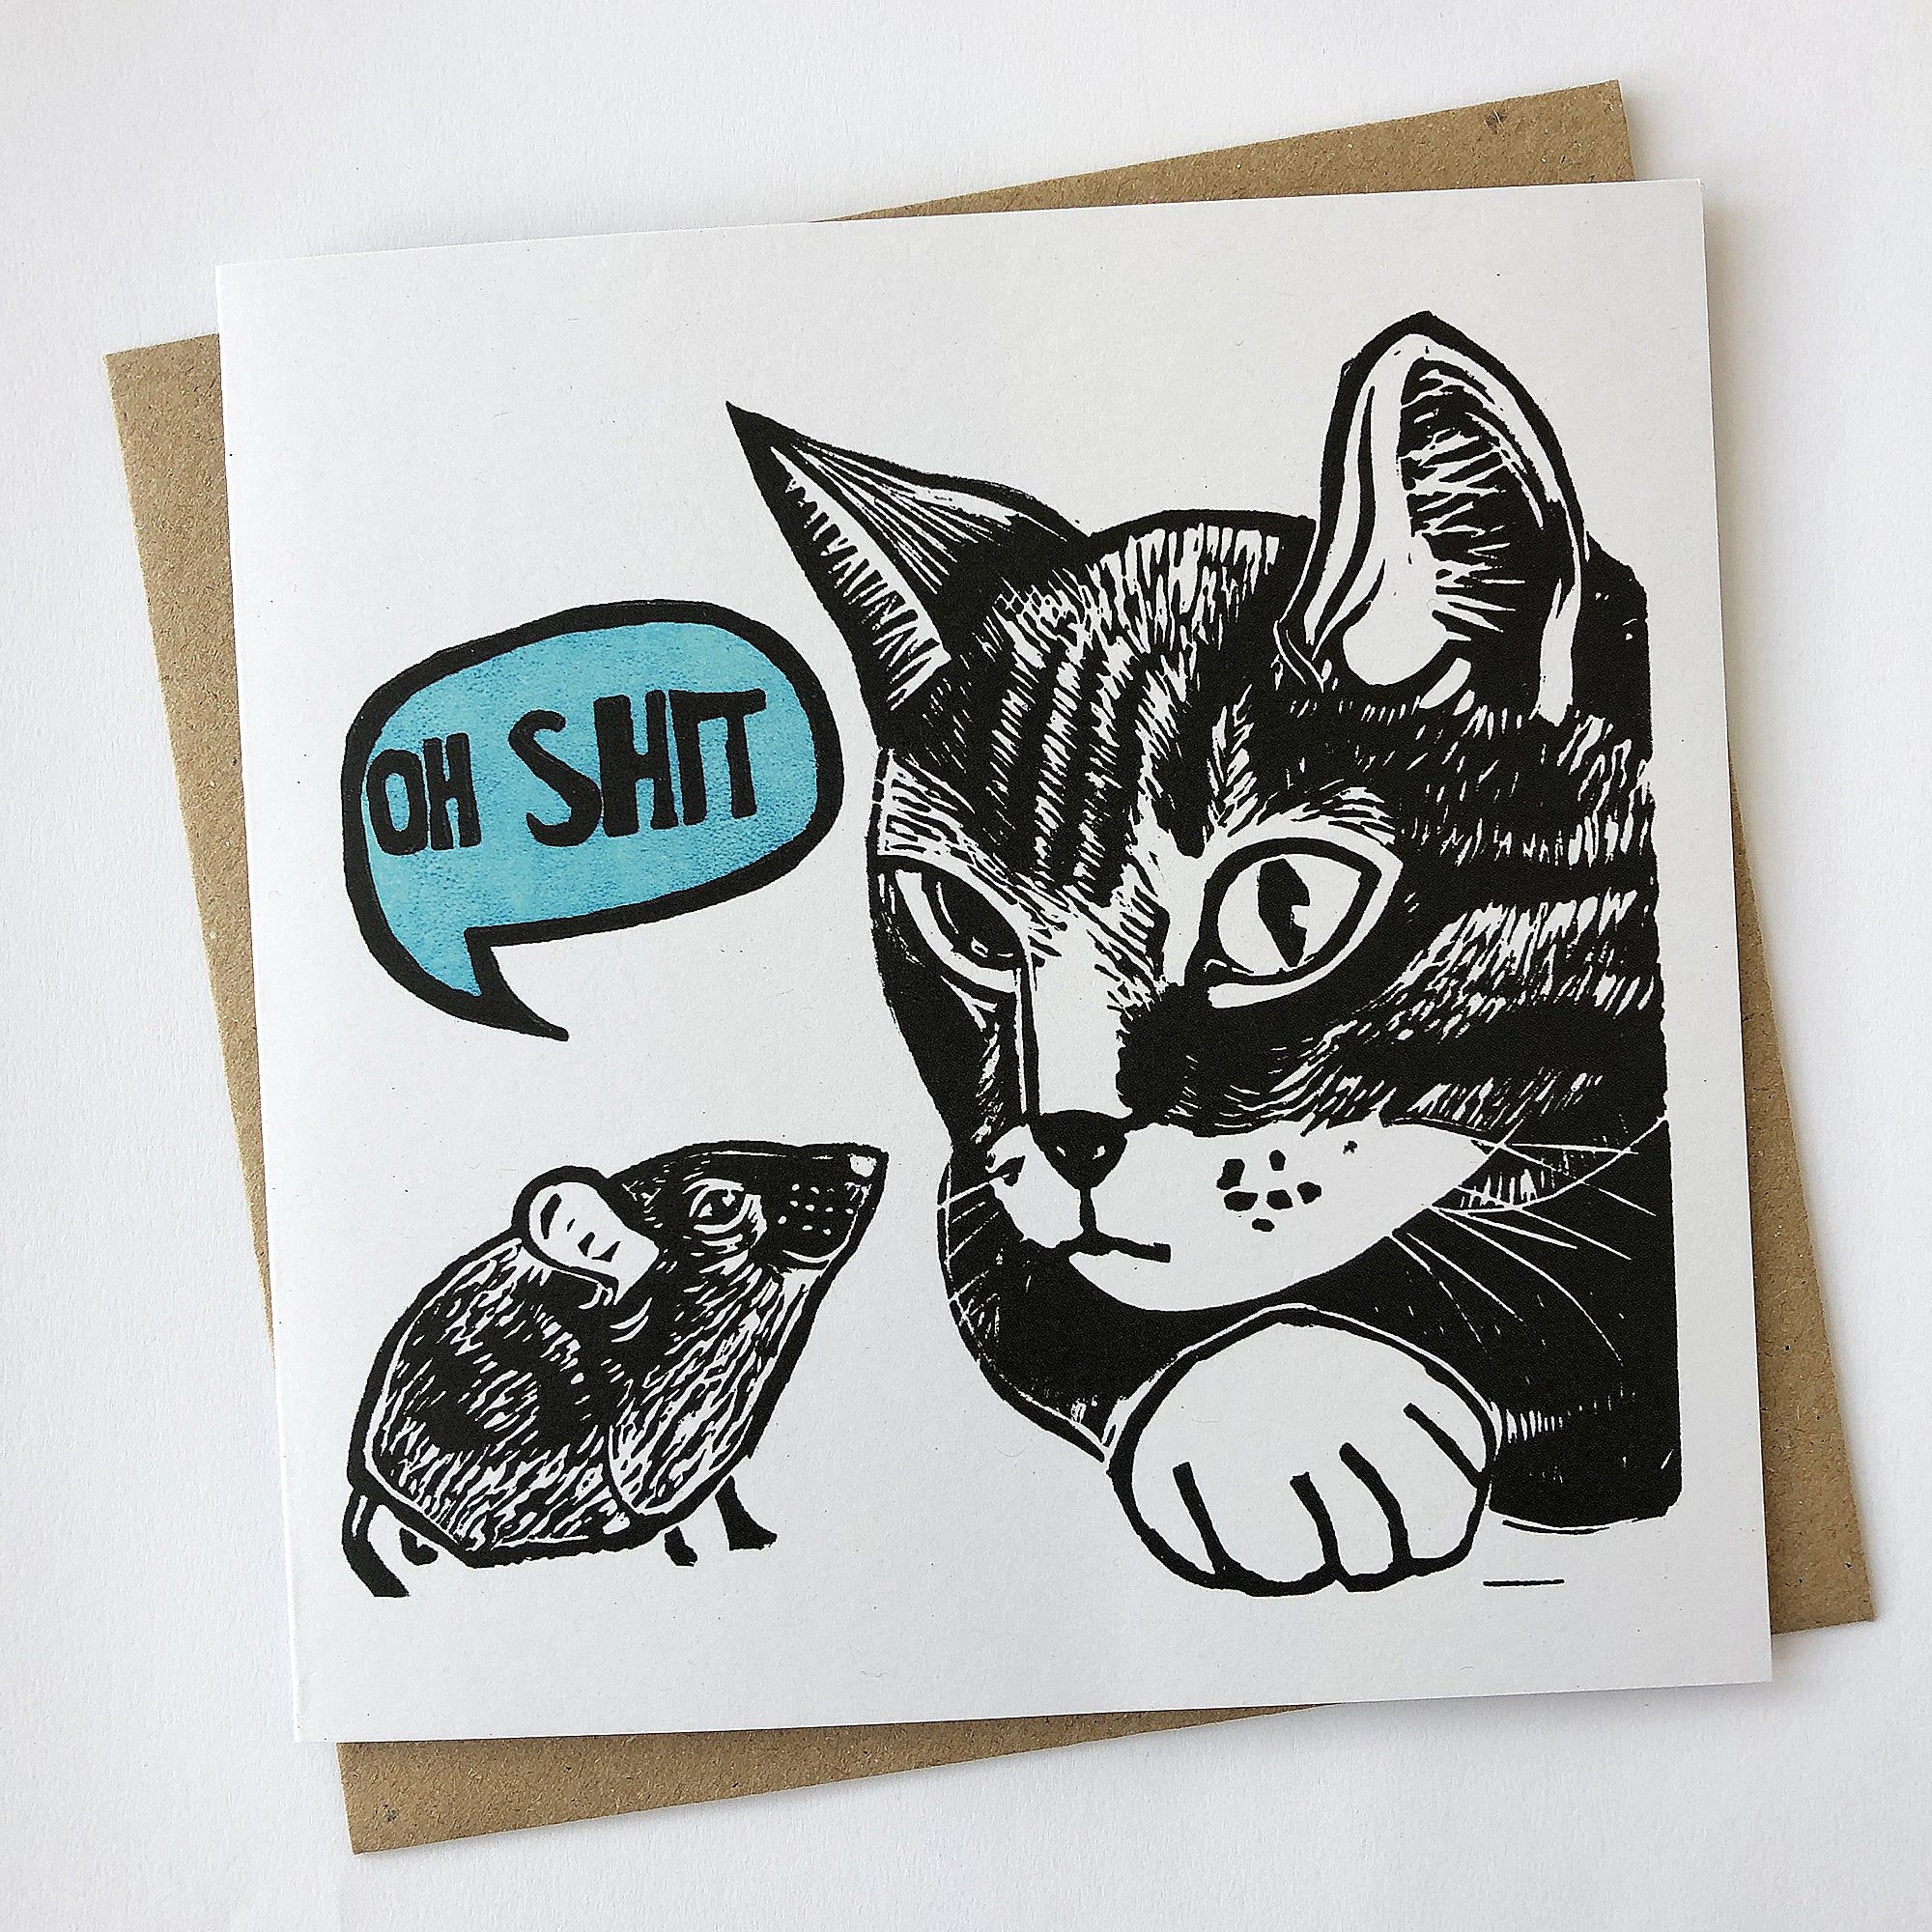 'Oh Shit' Cat and Mouse greetings card